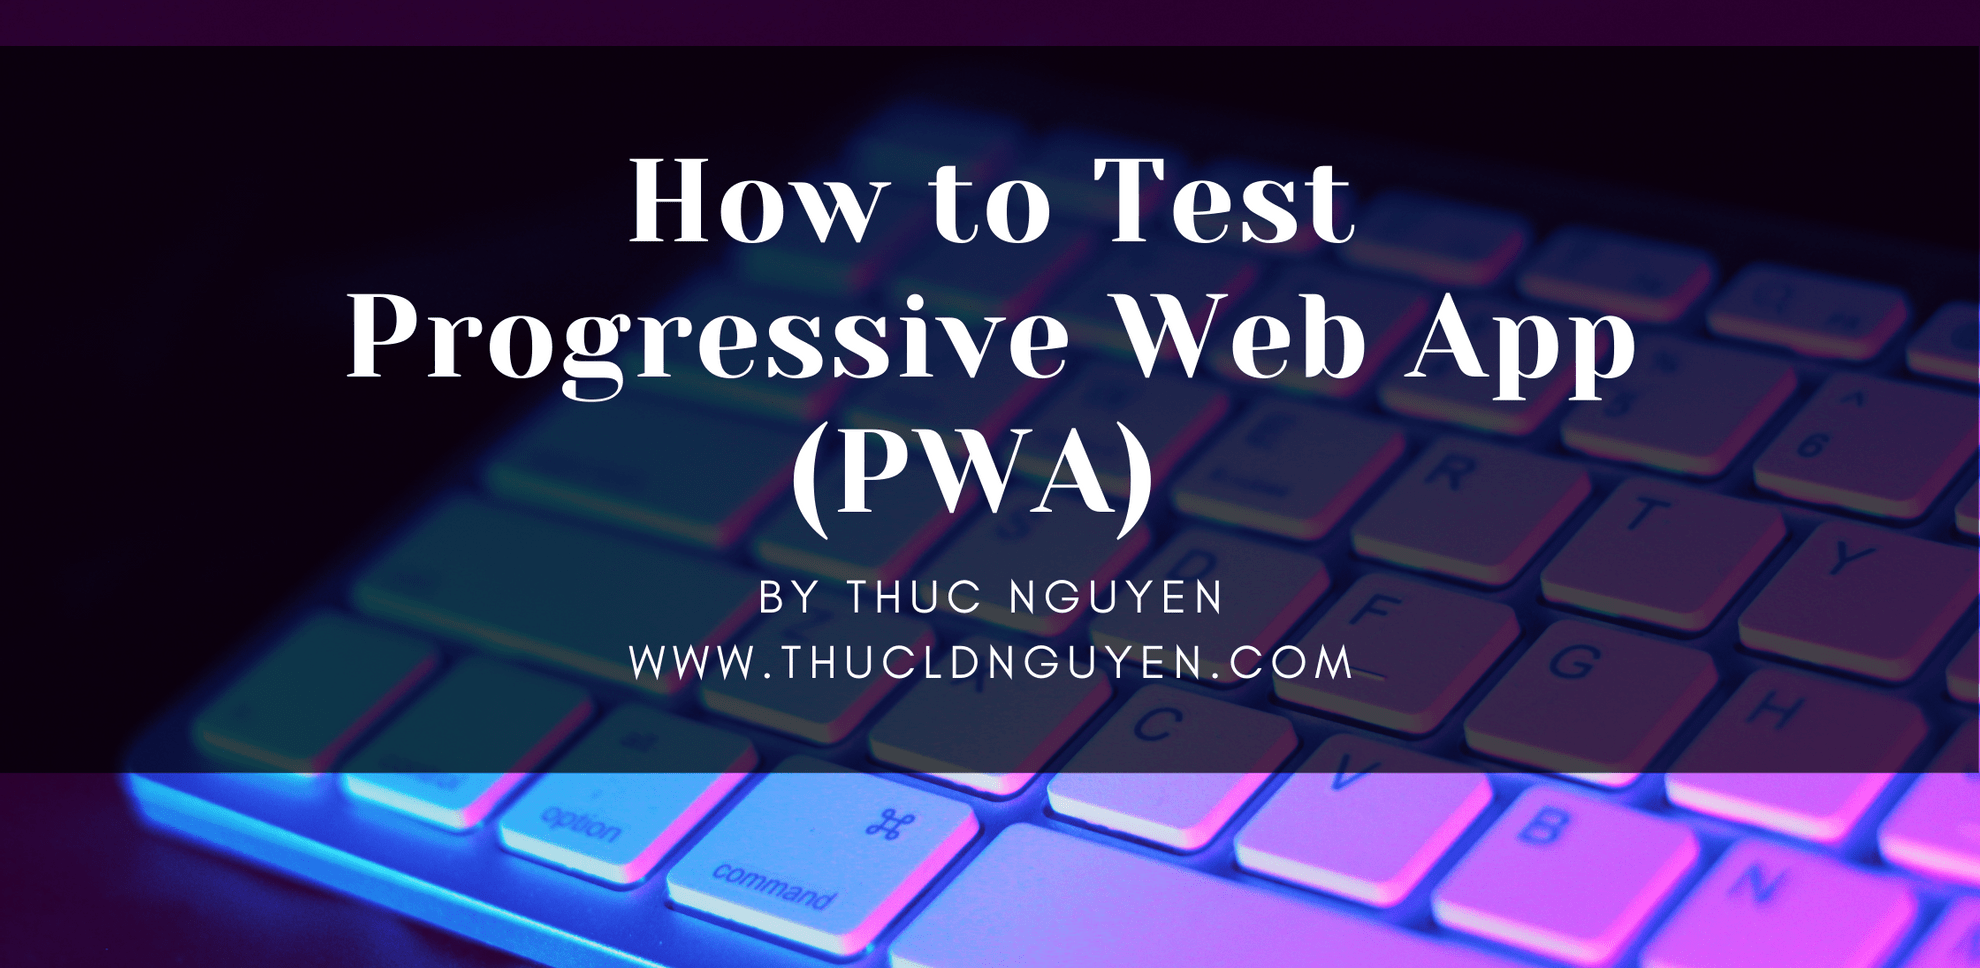 How to Test Progressive Web App - Featured image